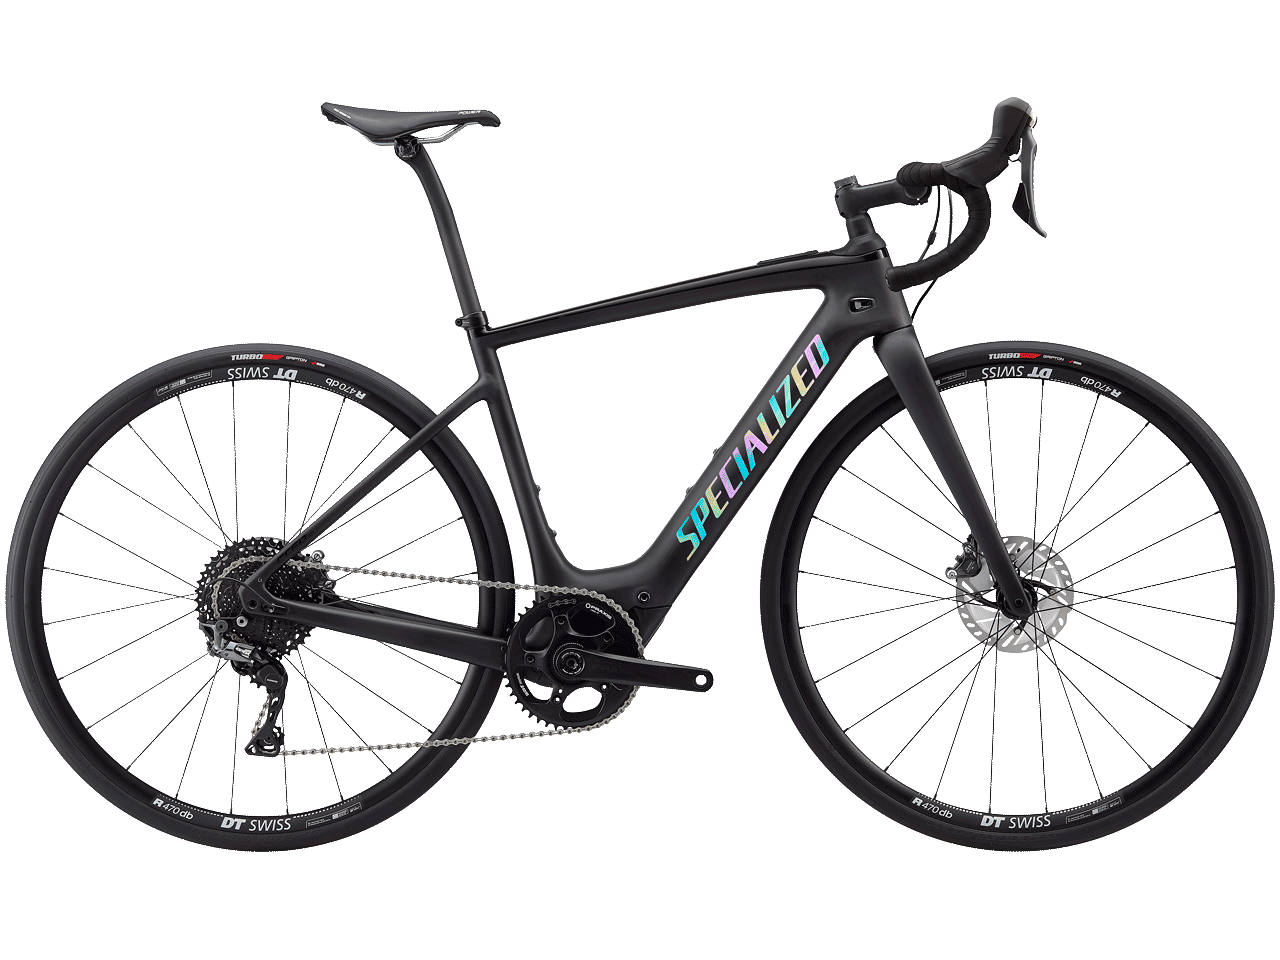 The Specialized Turbo Creo SL